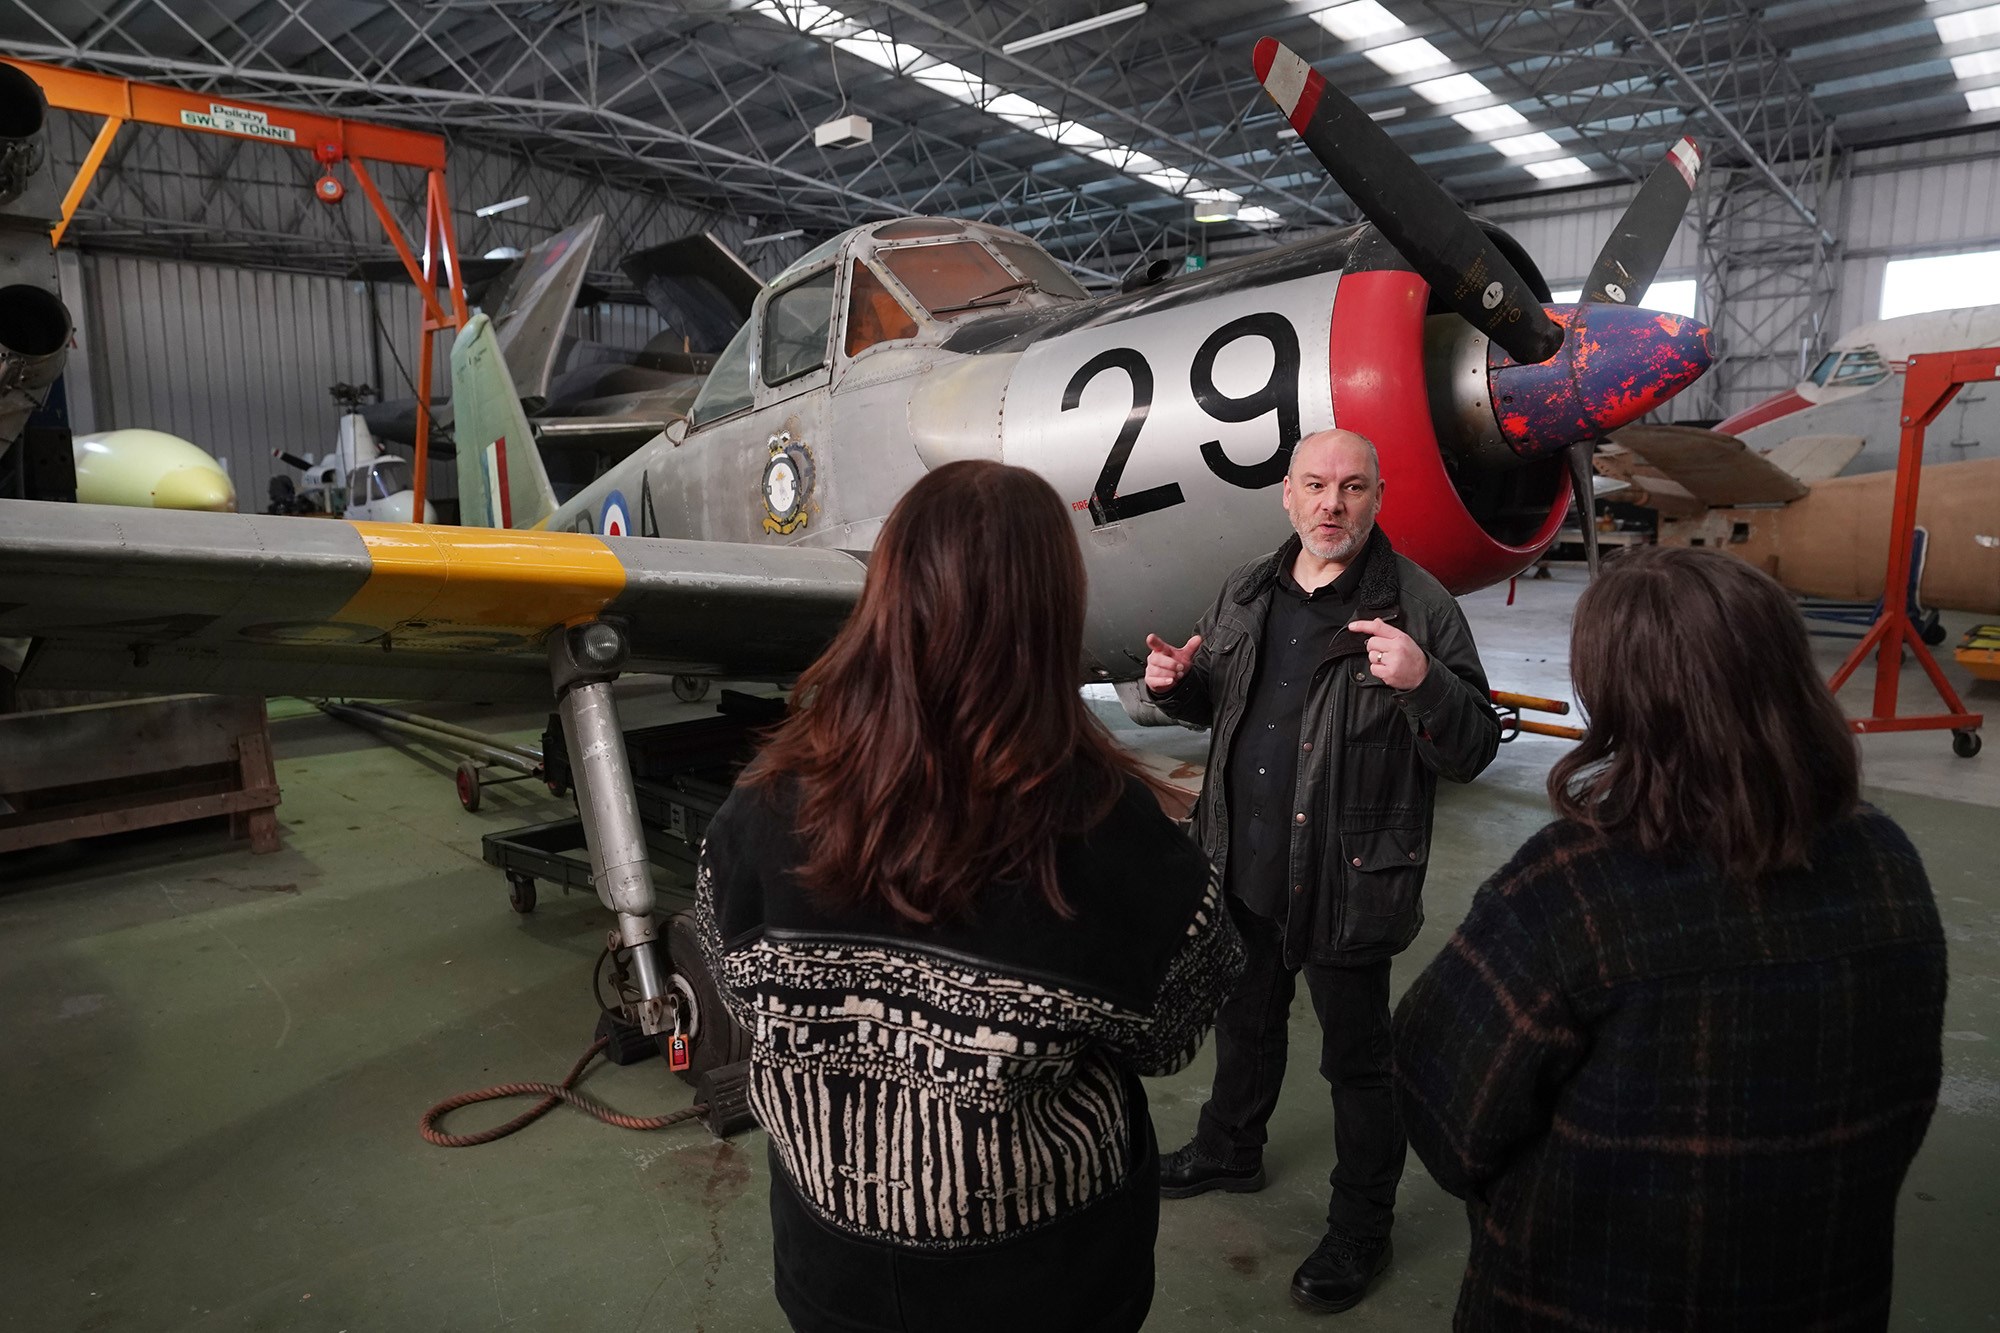 Two visitors listening to a man talking in front of an aircraft.